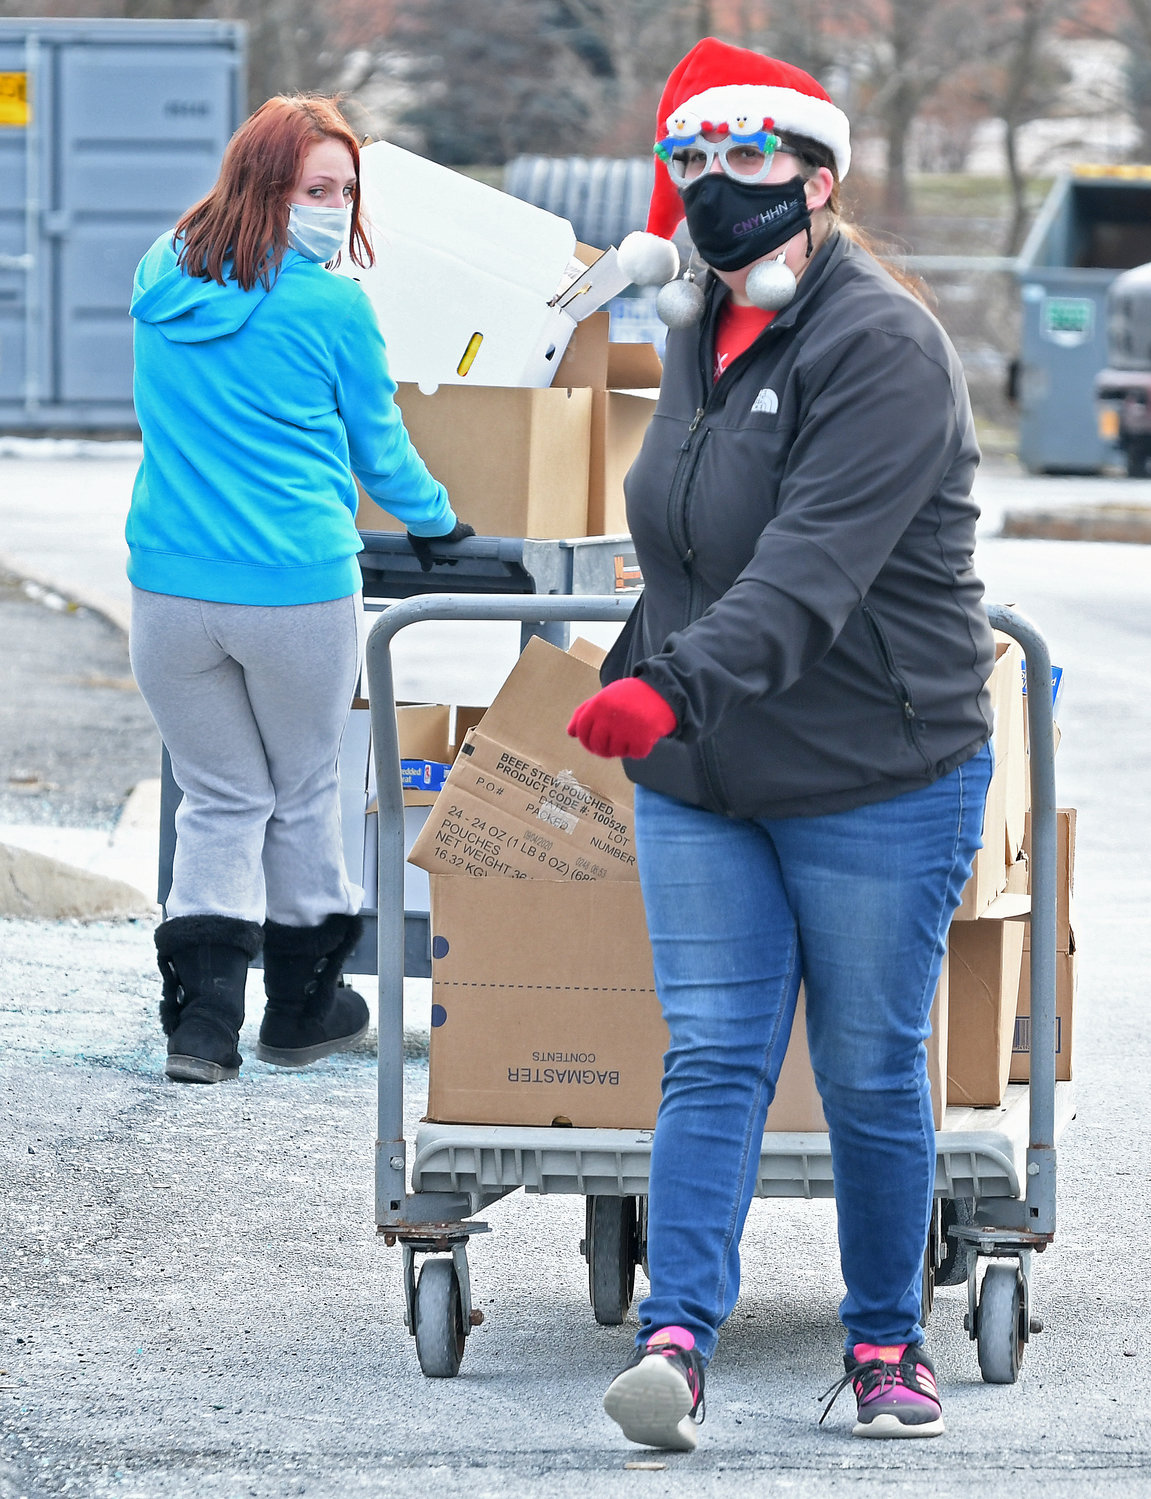 CARTING OUT THE FOOD — Rolling out carts filled with food items for a Connected Community Schools Holiday Food Giveaway on Wednesday at Staley Elementary School are, from left, Mandi McGuigan and Alyssa Whitaker. The food distribution program marked one million pounds of food that has been provided since last March in response to COVID-19.